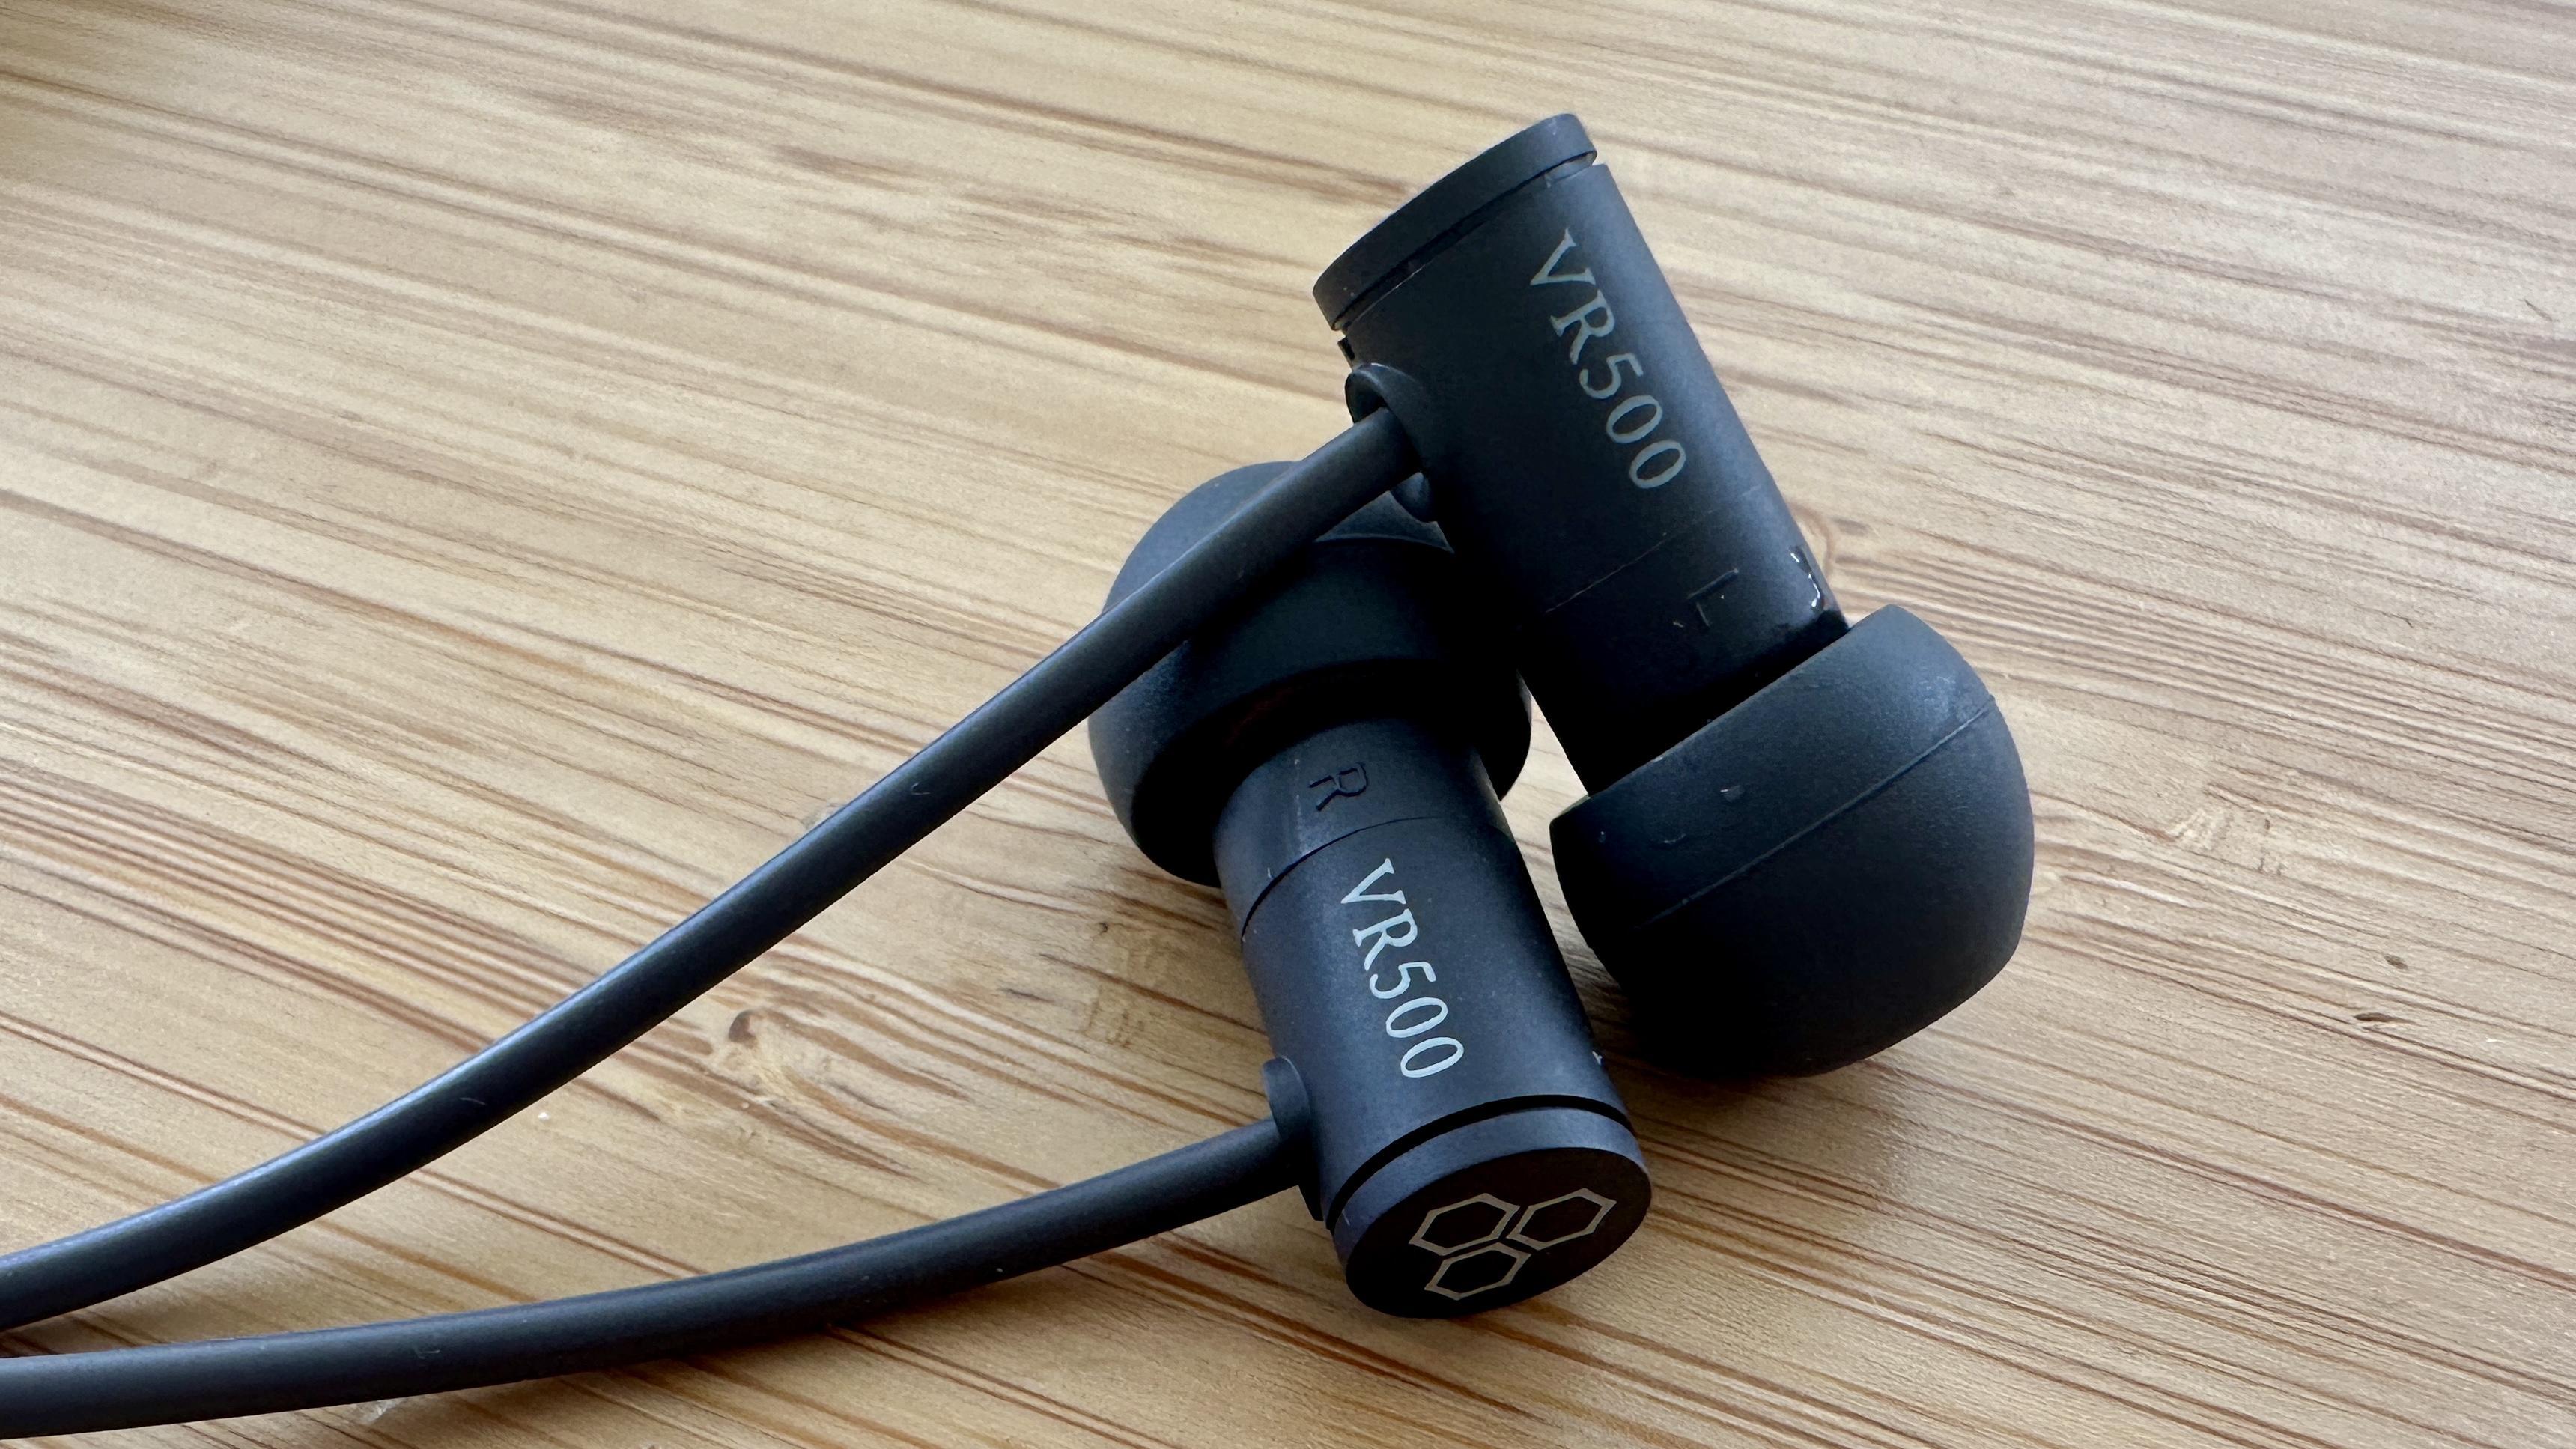 Final VR500 review: unassuming wired in-ear headphones that have it where it counts